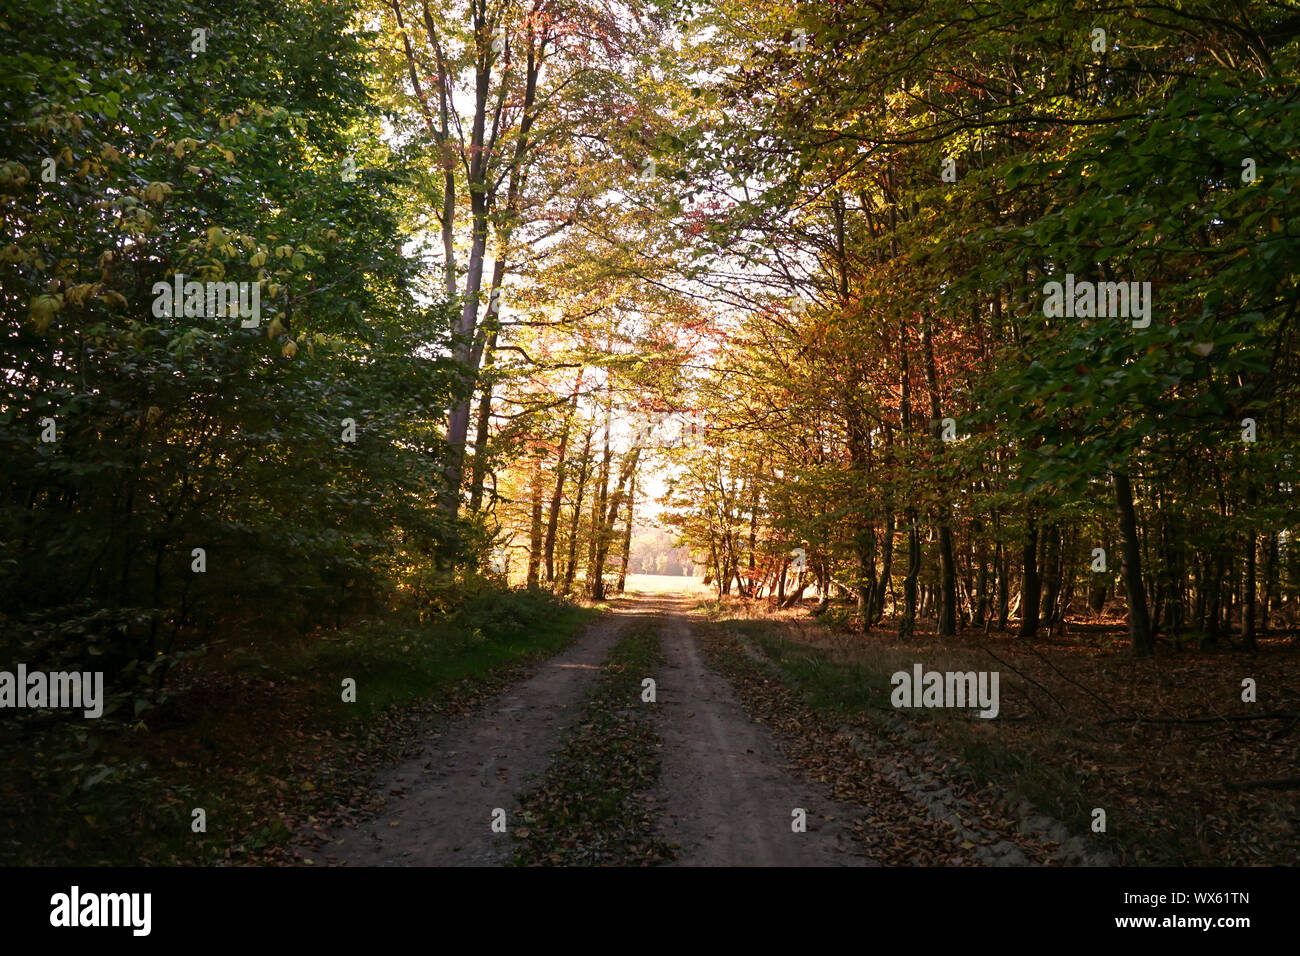 Colorful scenic landscape with trees in forest in autumn. Stock Photo